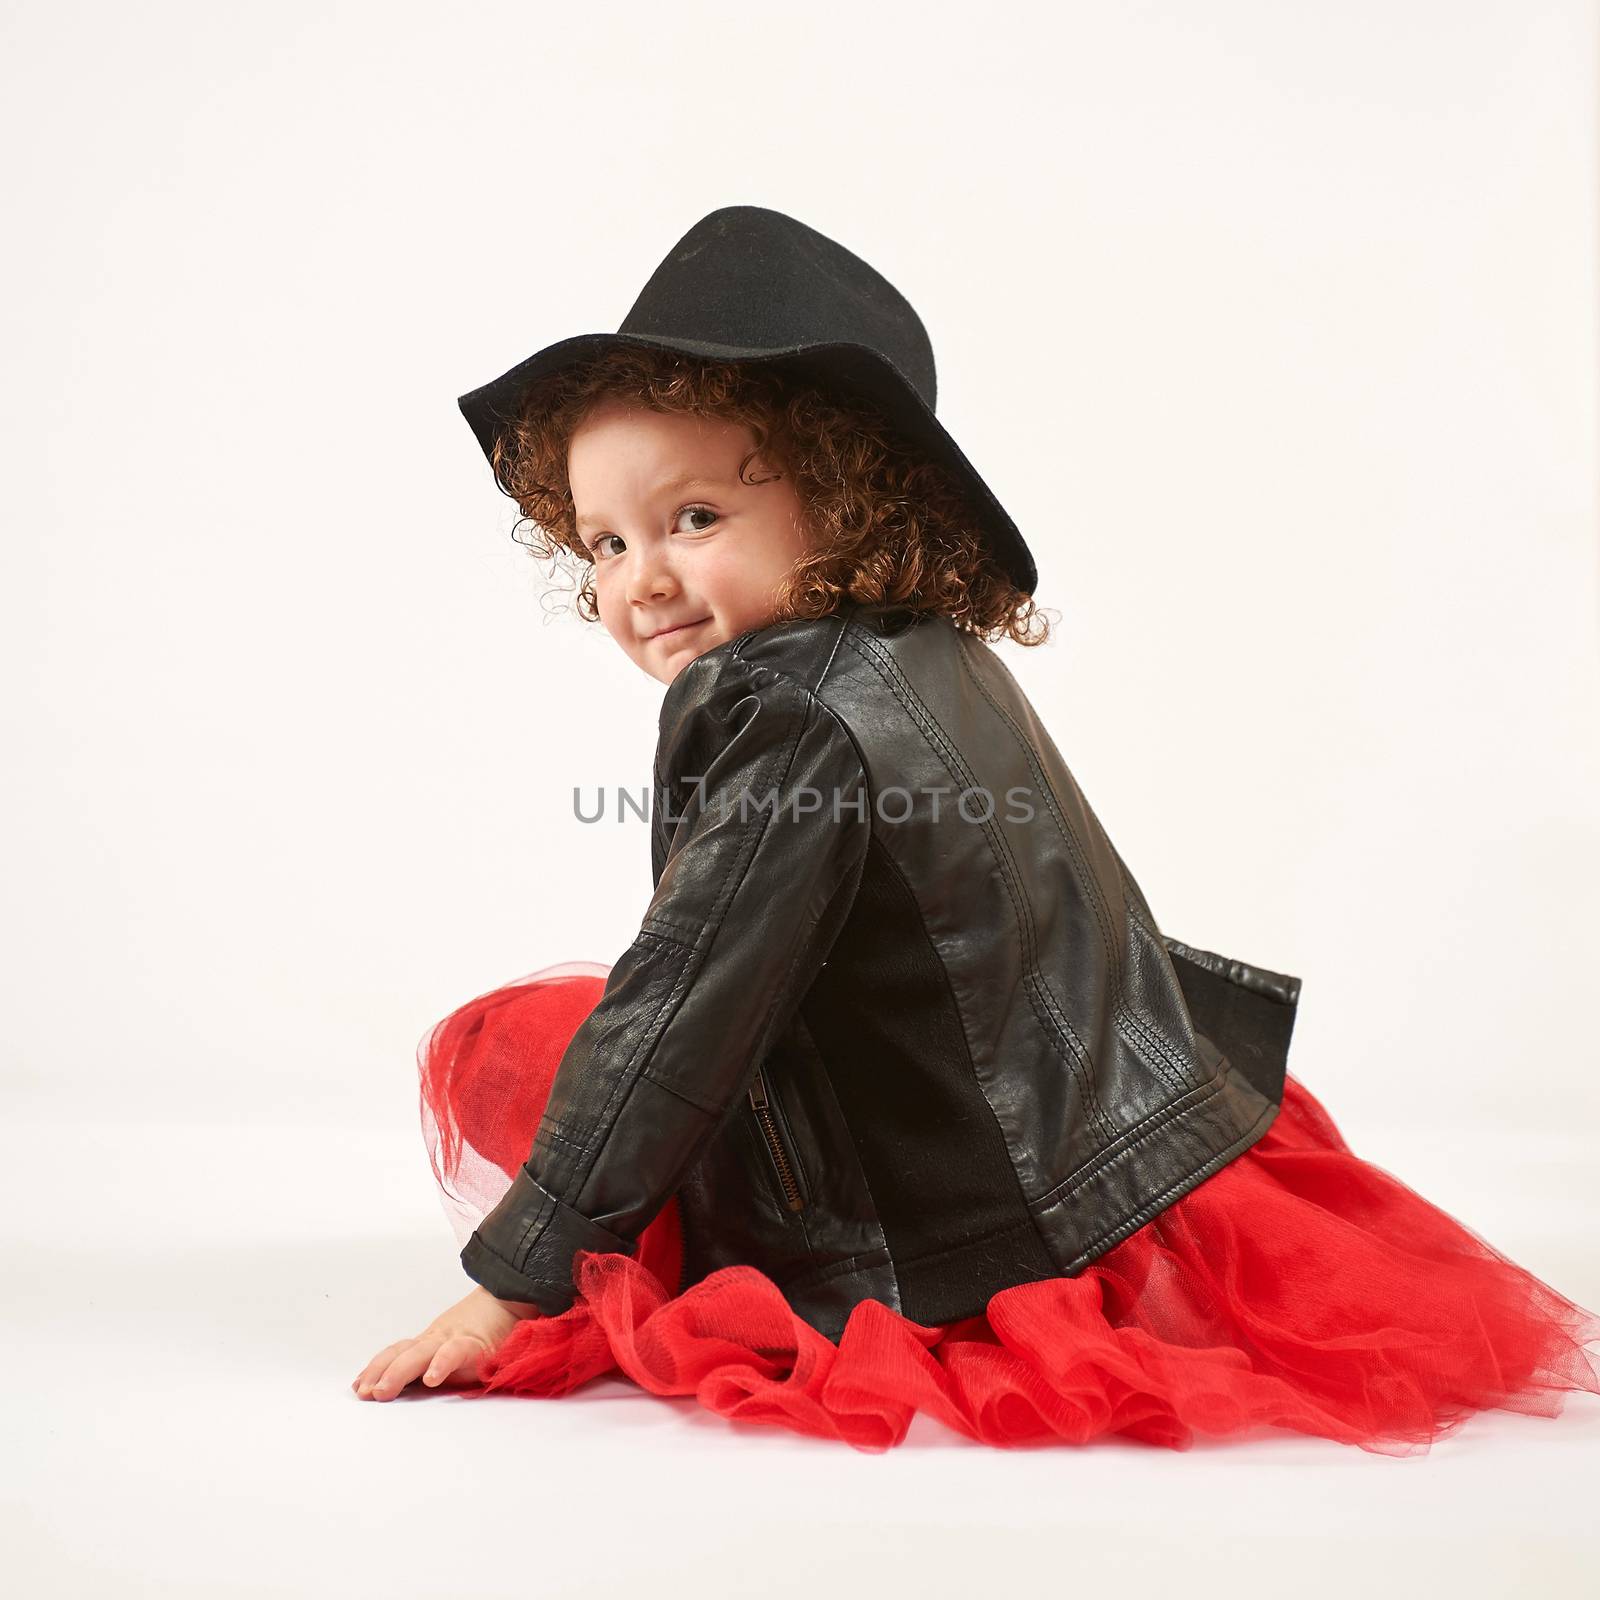 Little girl with black hat sitting and smiling